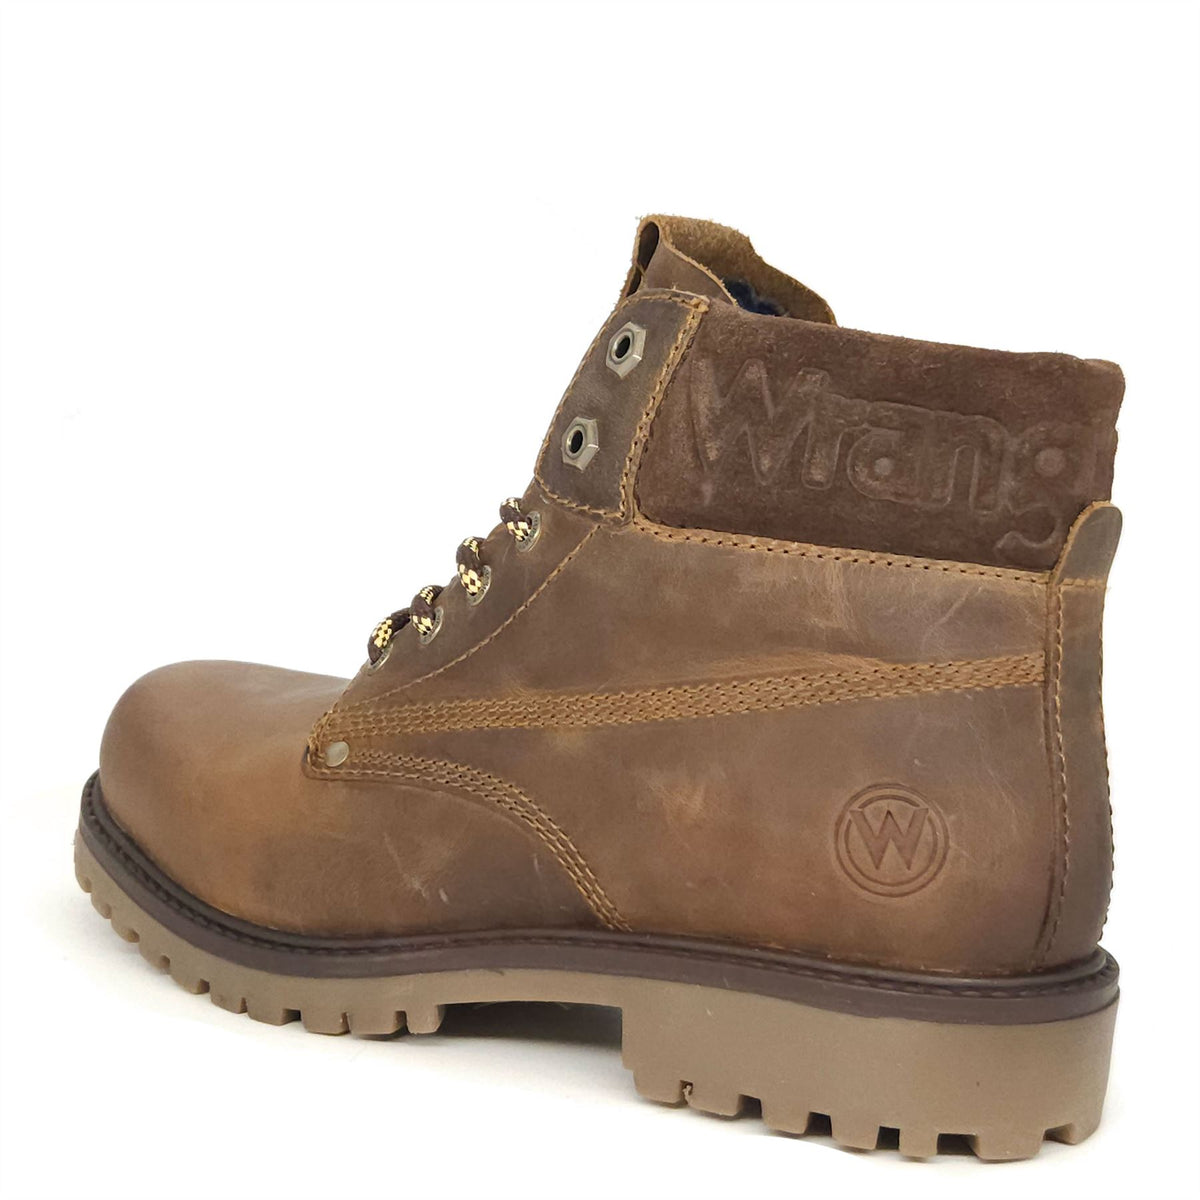 Wrangler Arch Lace Up Boots